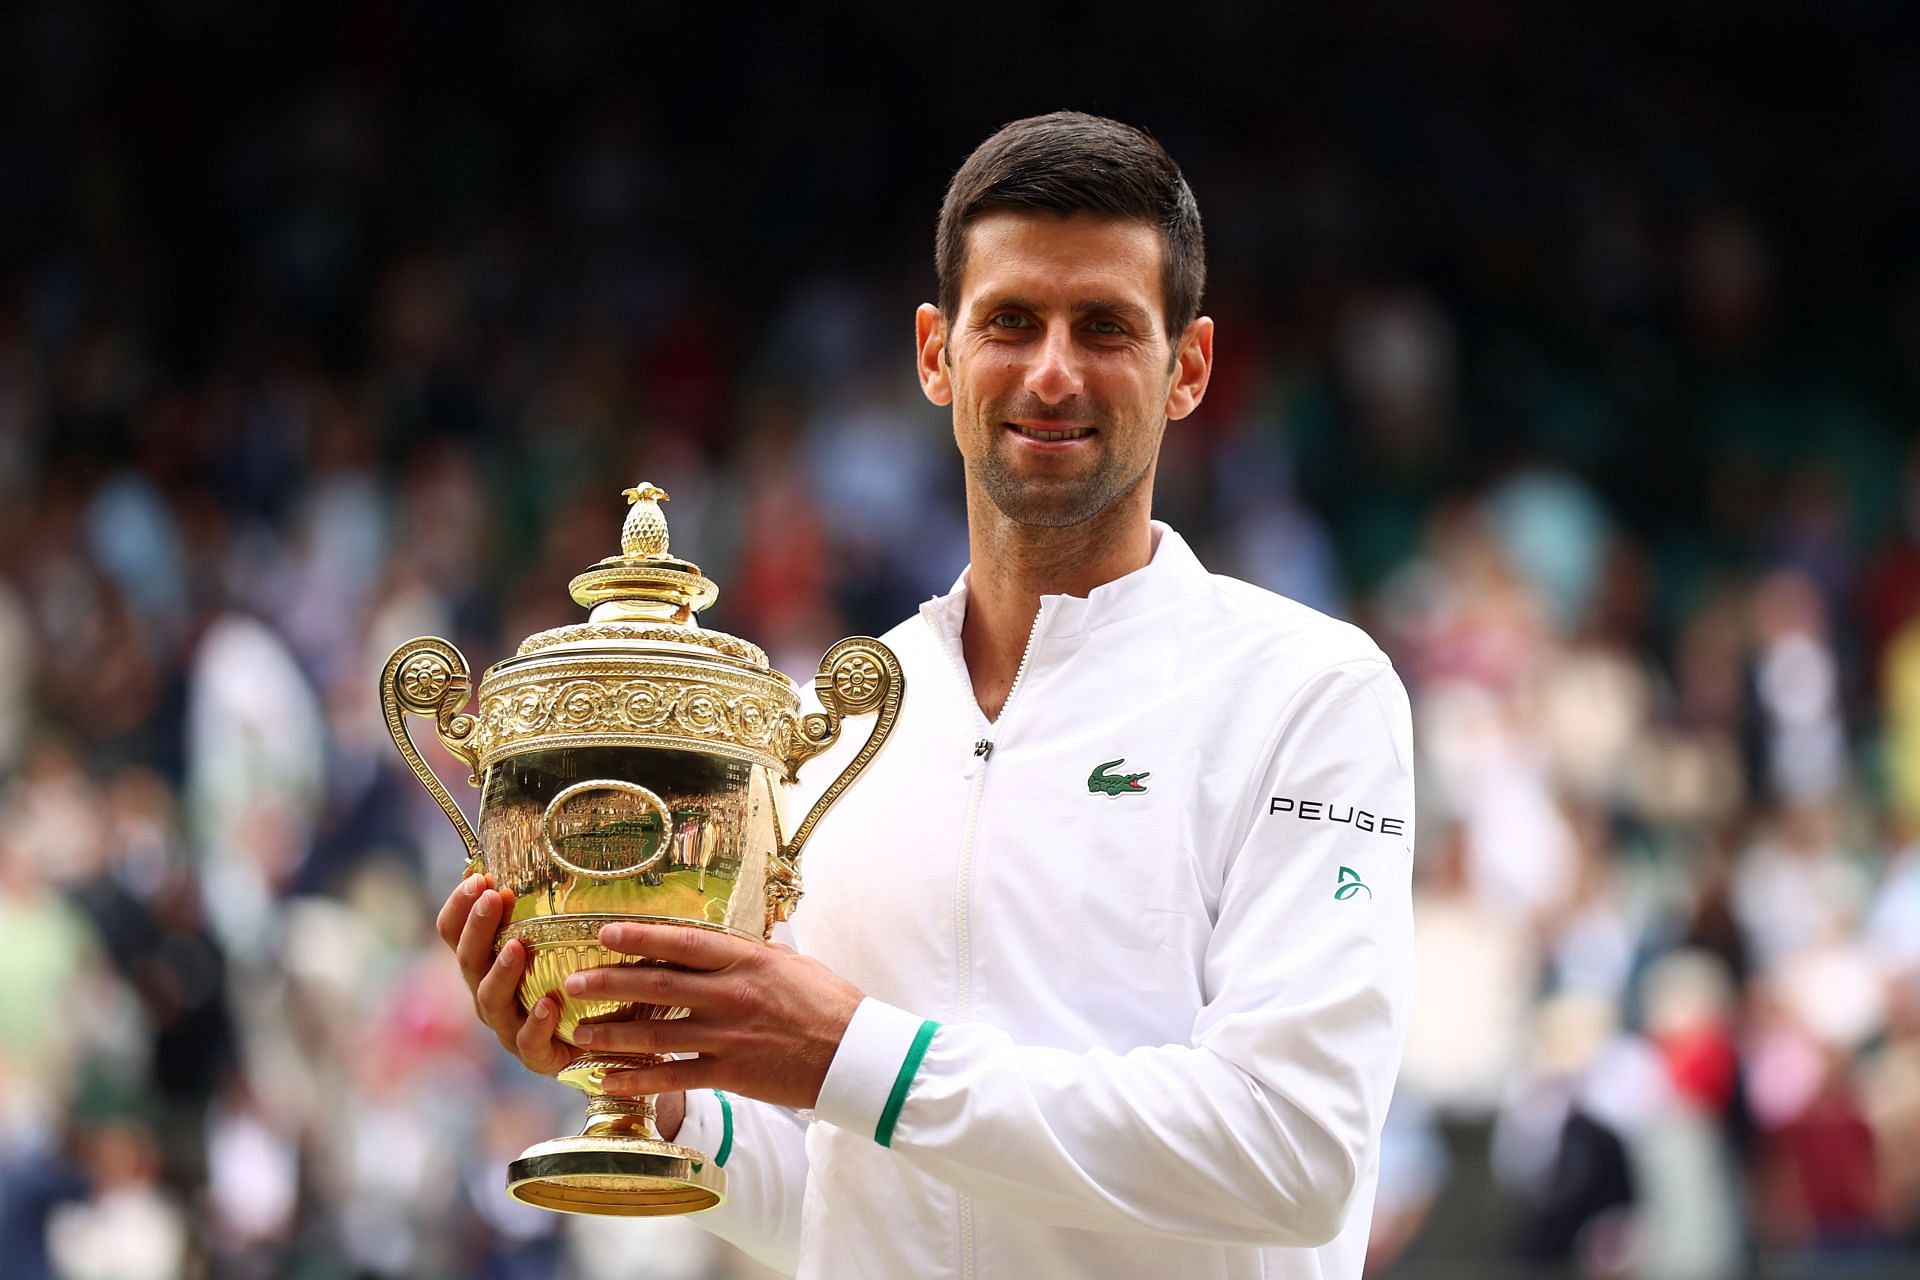 Wimbledon does not pose any immediate concerns for the defending champion.